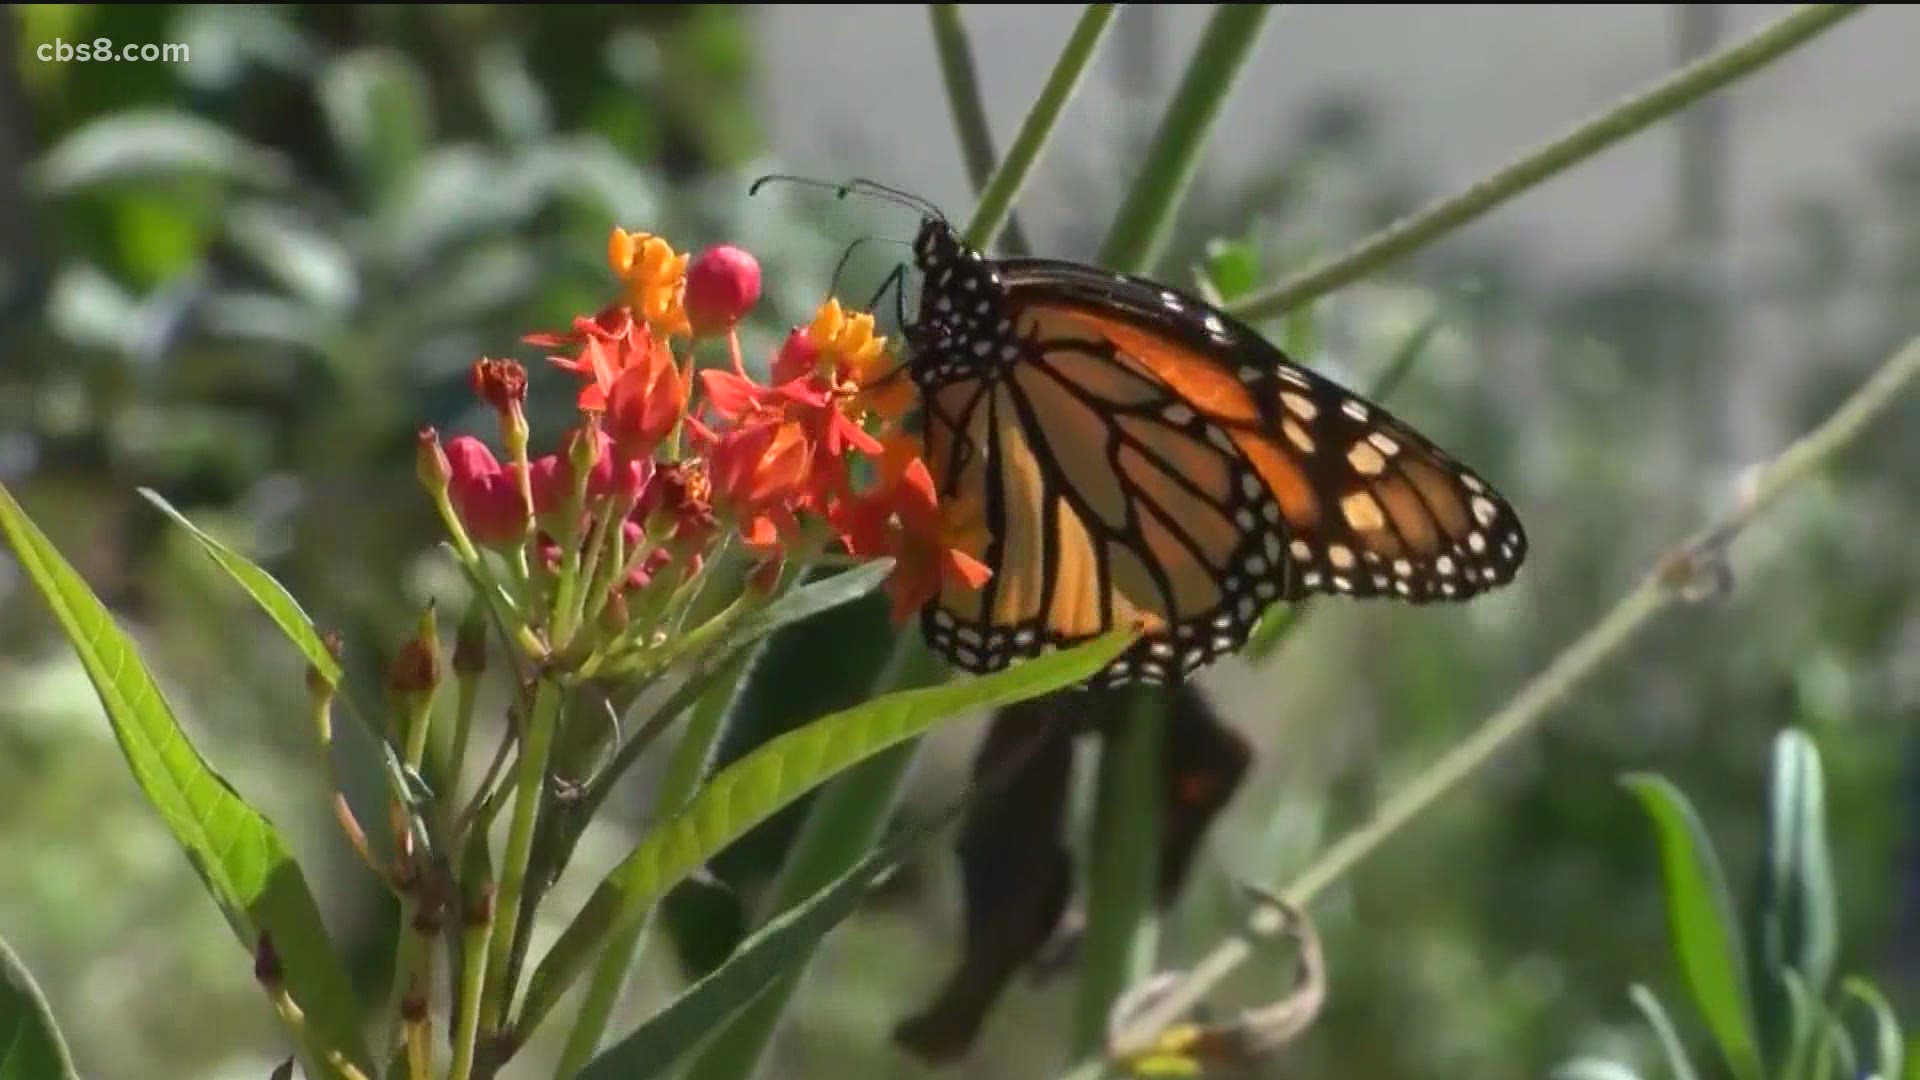 The butterflies migrate to their overwintering habitat along the coast where this year the numbers are so low experts are concerned, they could disappear completely.